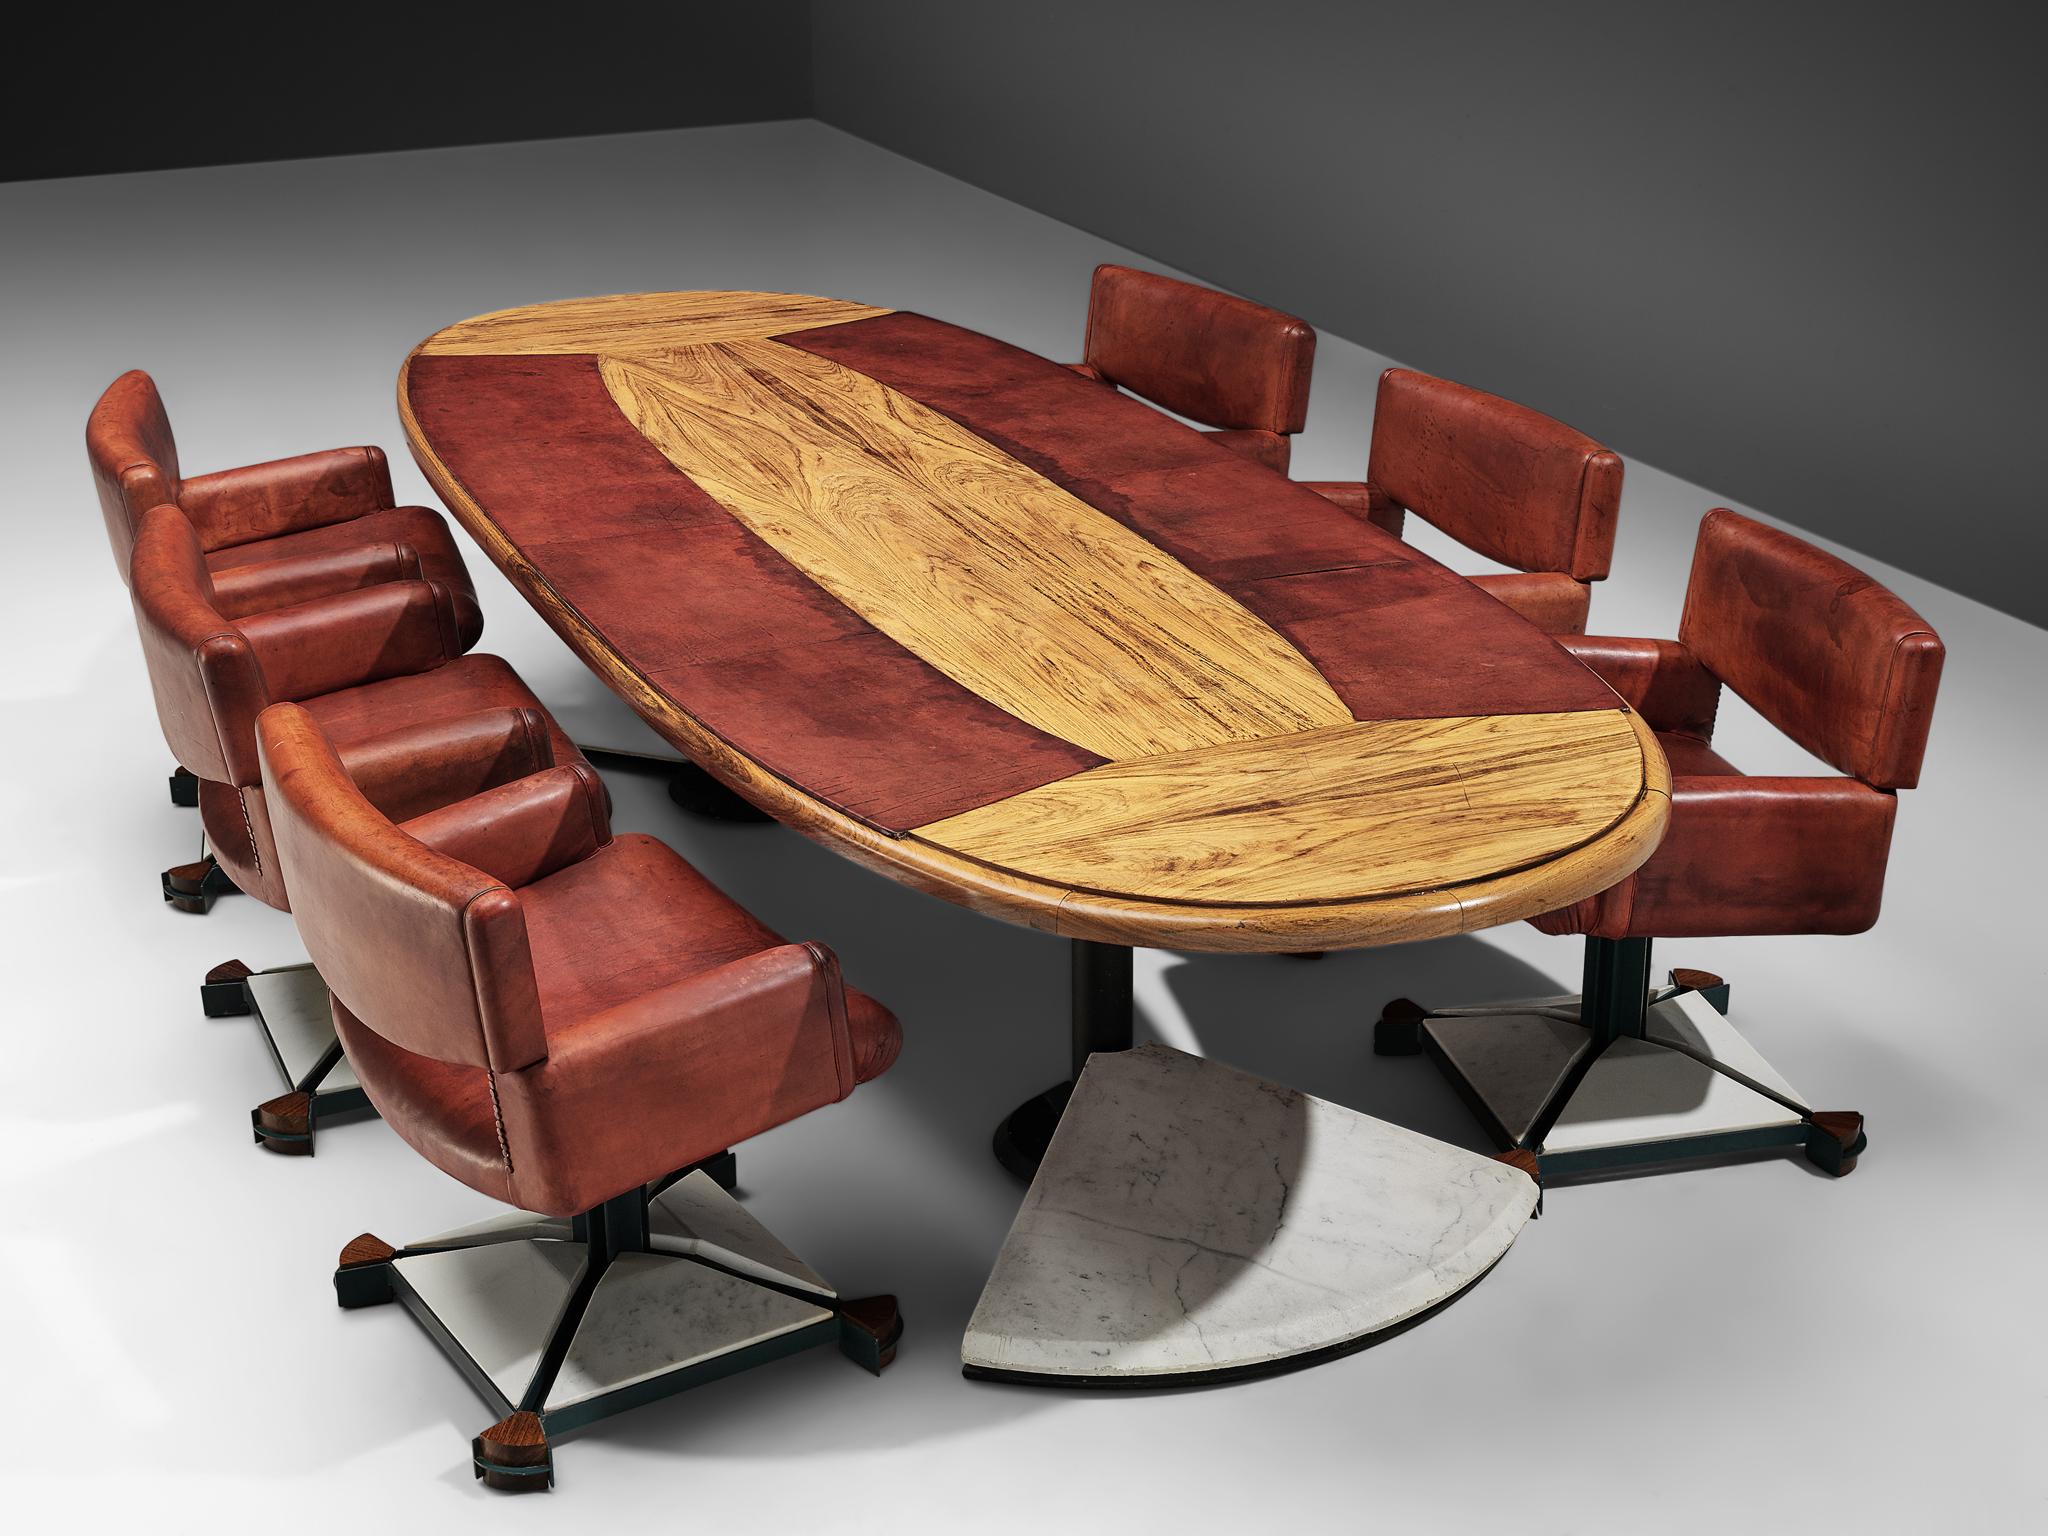 Post-Modern Set of Conference Table and Chairs in Walnut and Red Leather